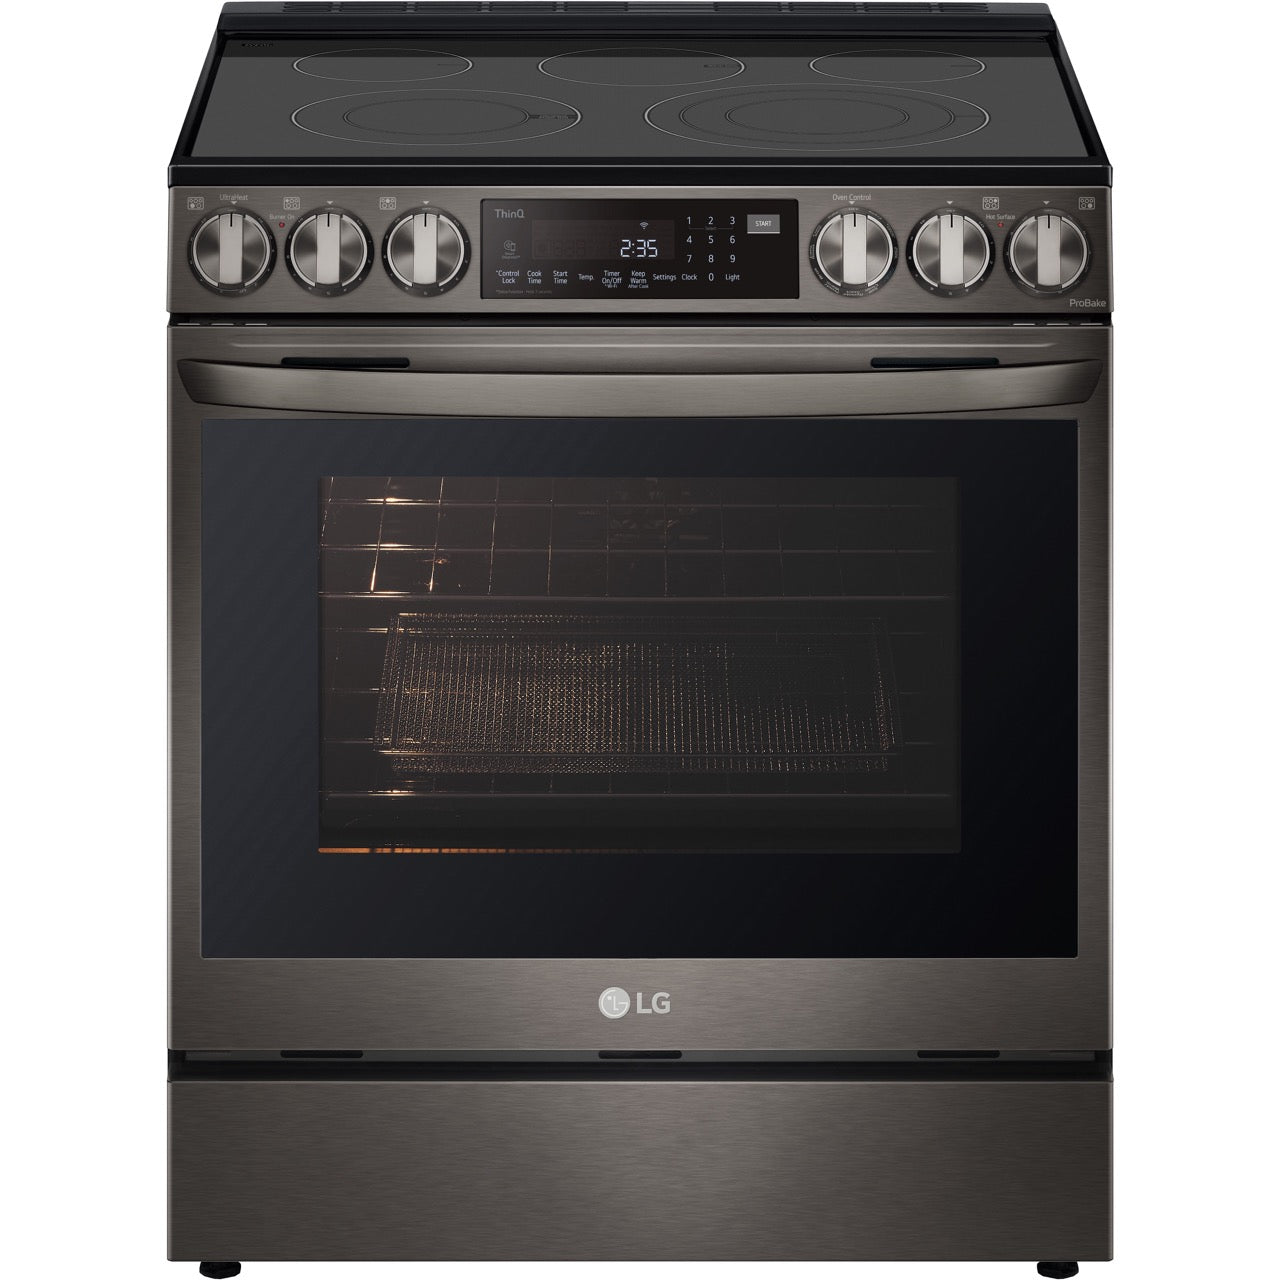 LG 6.3-Cu. Ft. Smart Wi-Fi Enabled ProBake Convection InstaView Electric Slide-in Range with Air Fry, Black Stainless Steel (LSEL6335D)